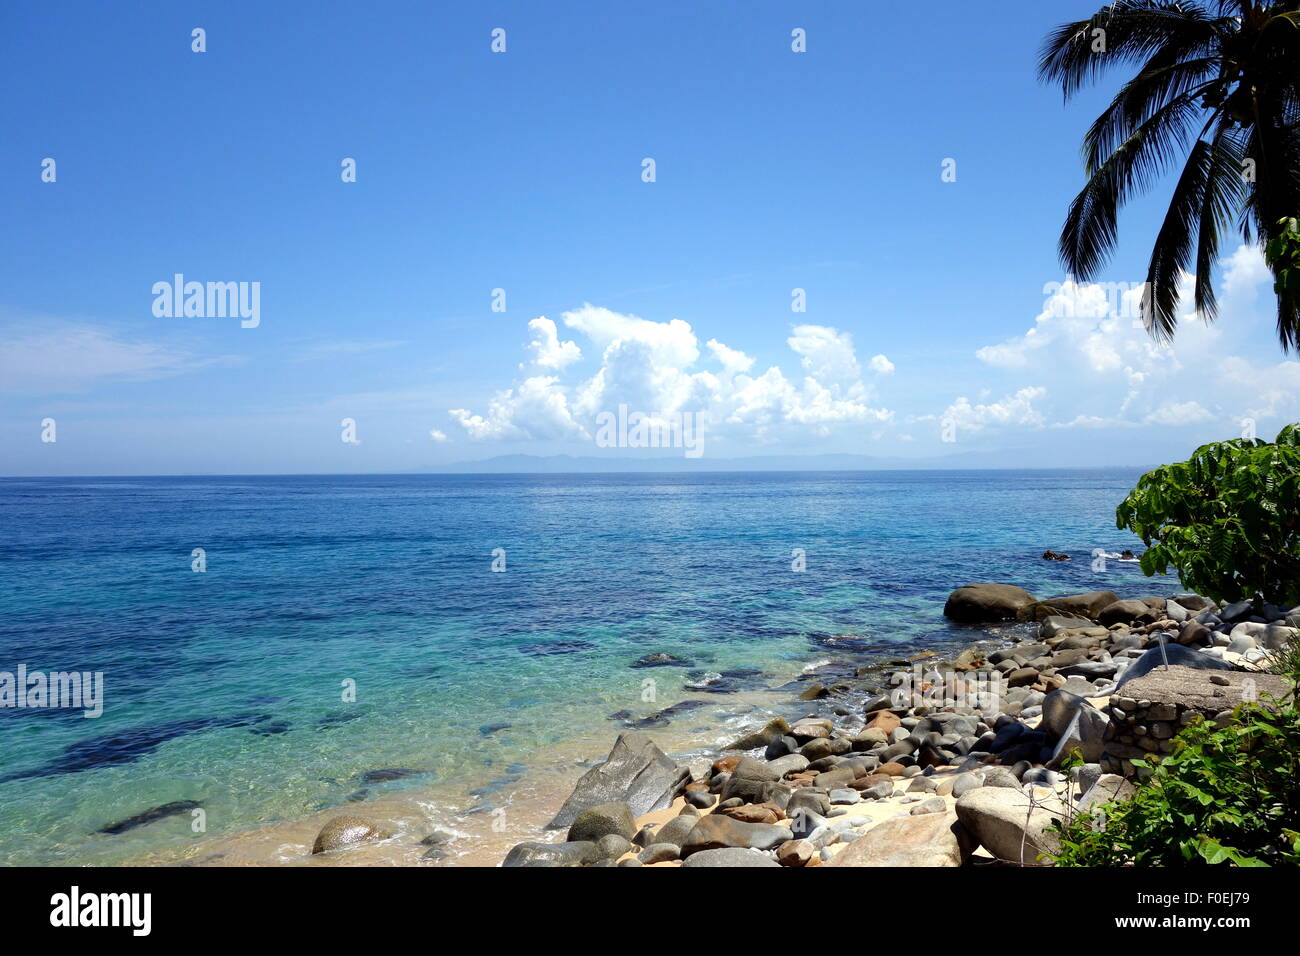 Clear turquoise blue water at a rocky beach near Puerto Vallarta, Mexico. Stock Photo